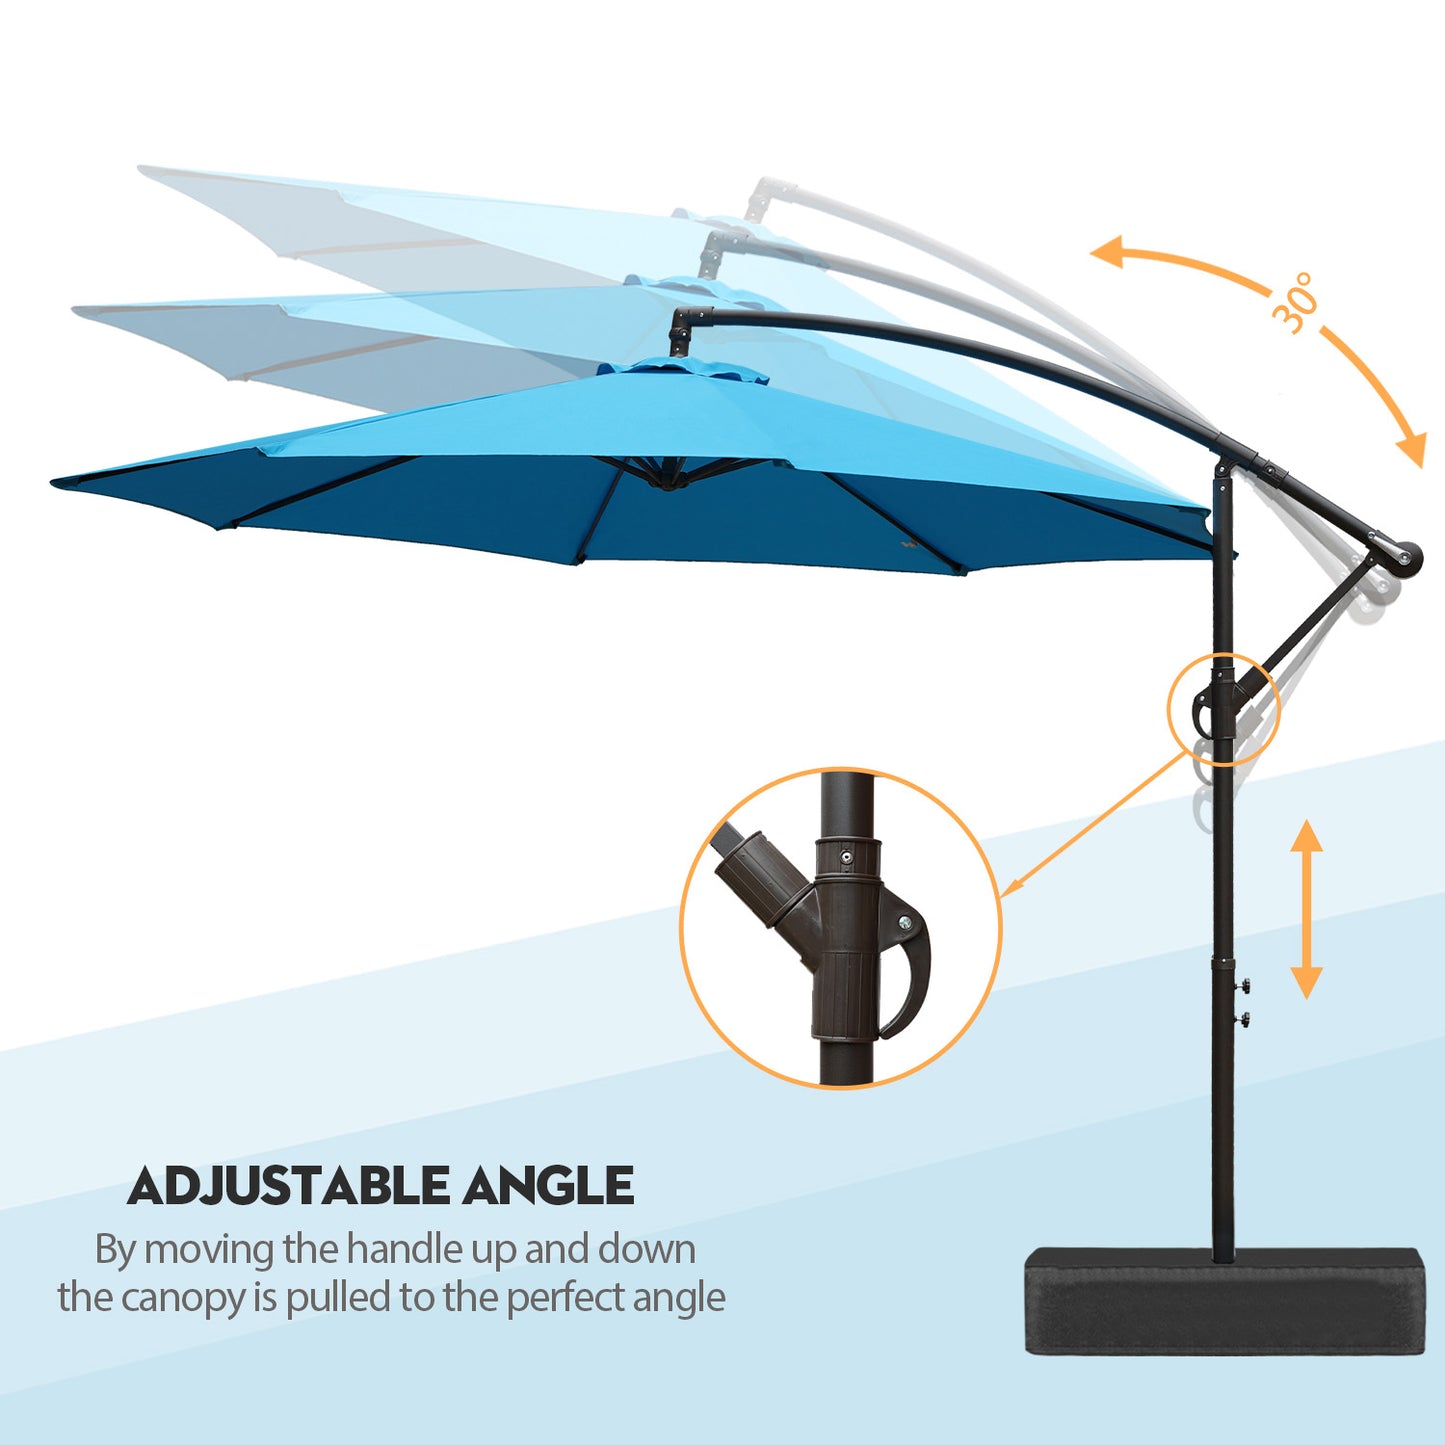 Offset Hanging Umbrella with Base Stand 10 Ft.